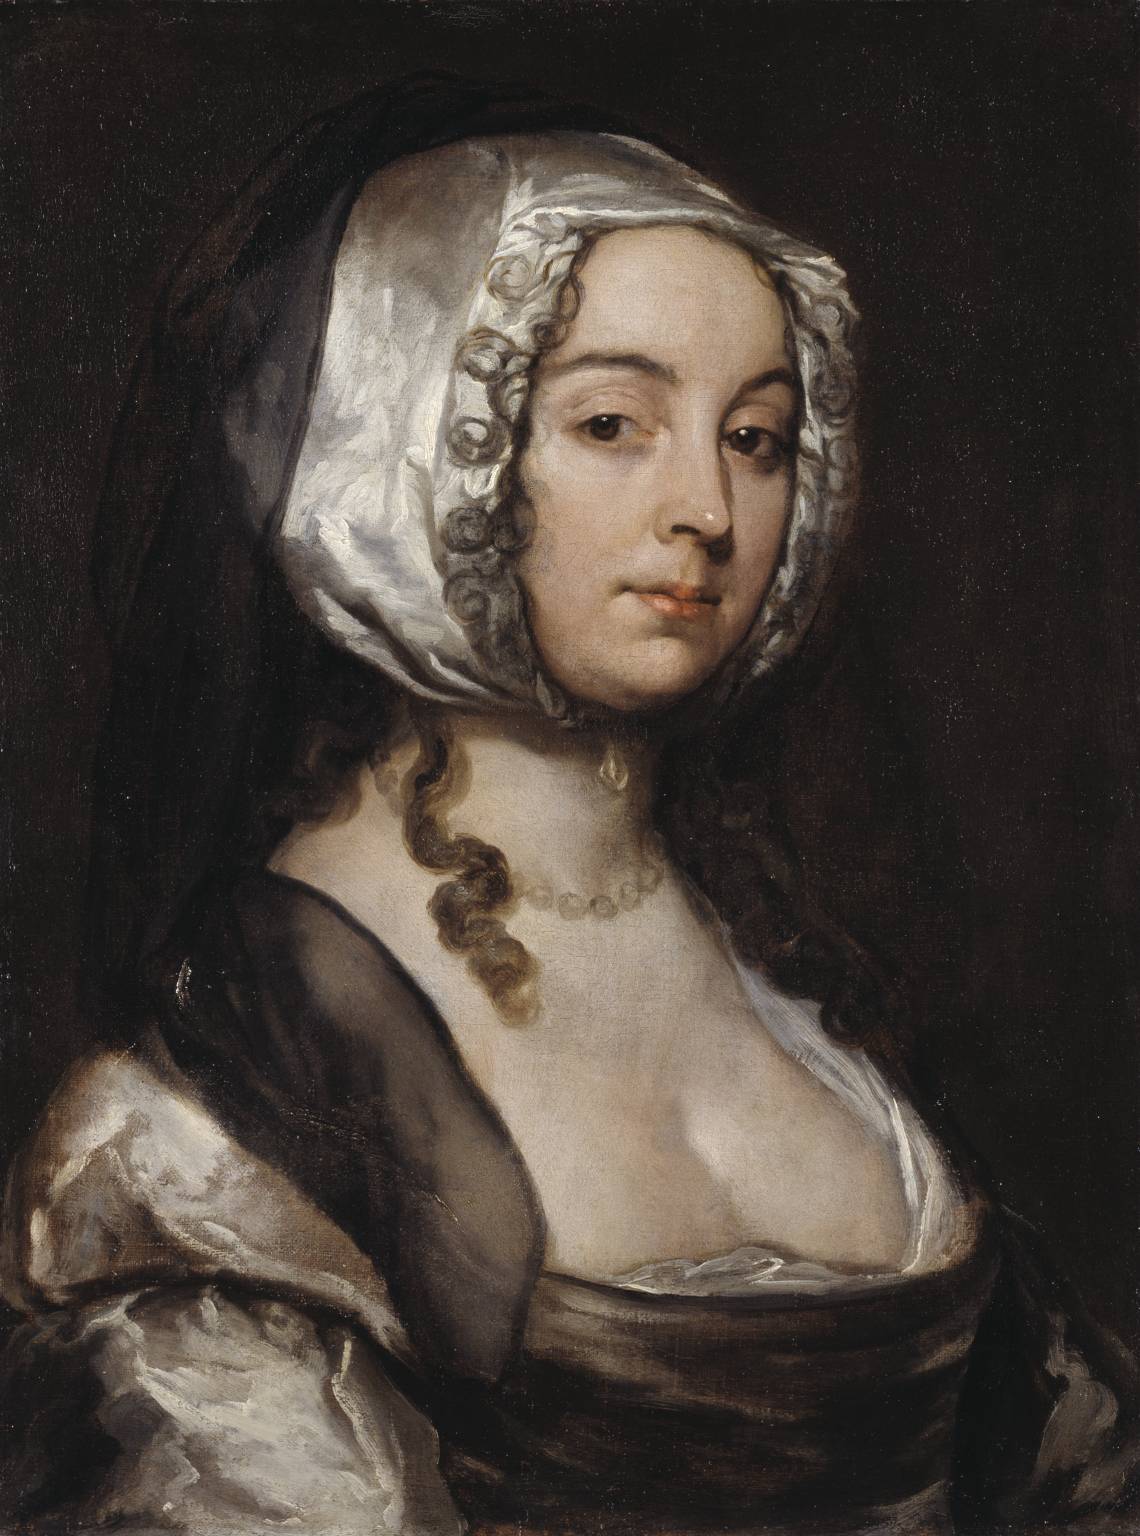 Portrait thought to be of the artist's second wife, Judith, c. 1635–1640